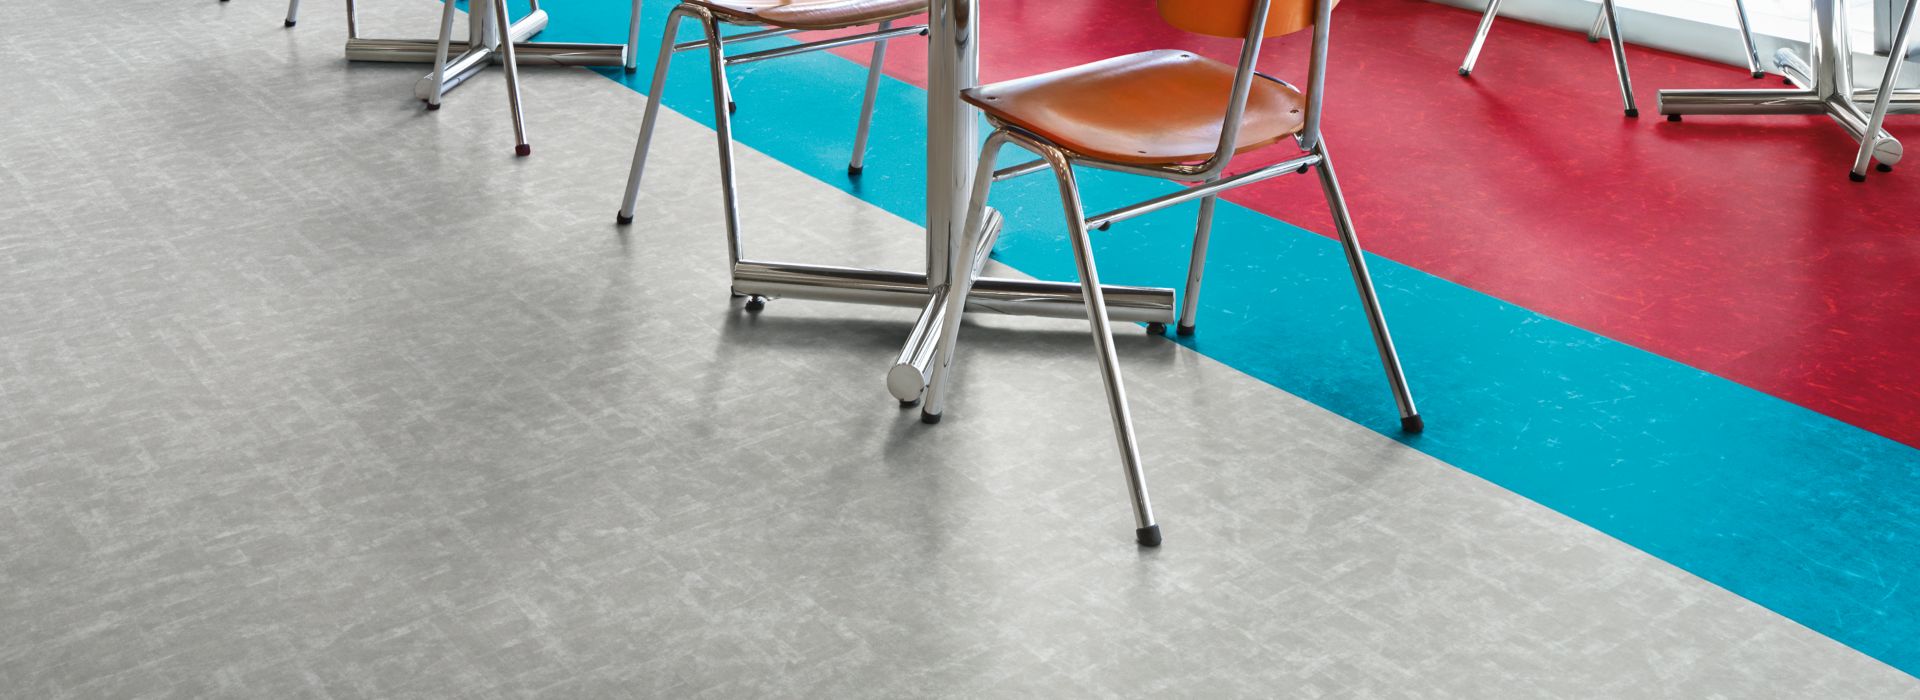 Interface Scorpio and Aries LVT in cafeteria setting with round table and chairs